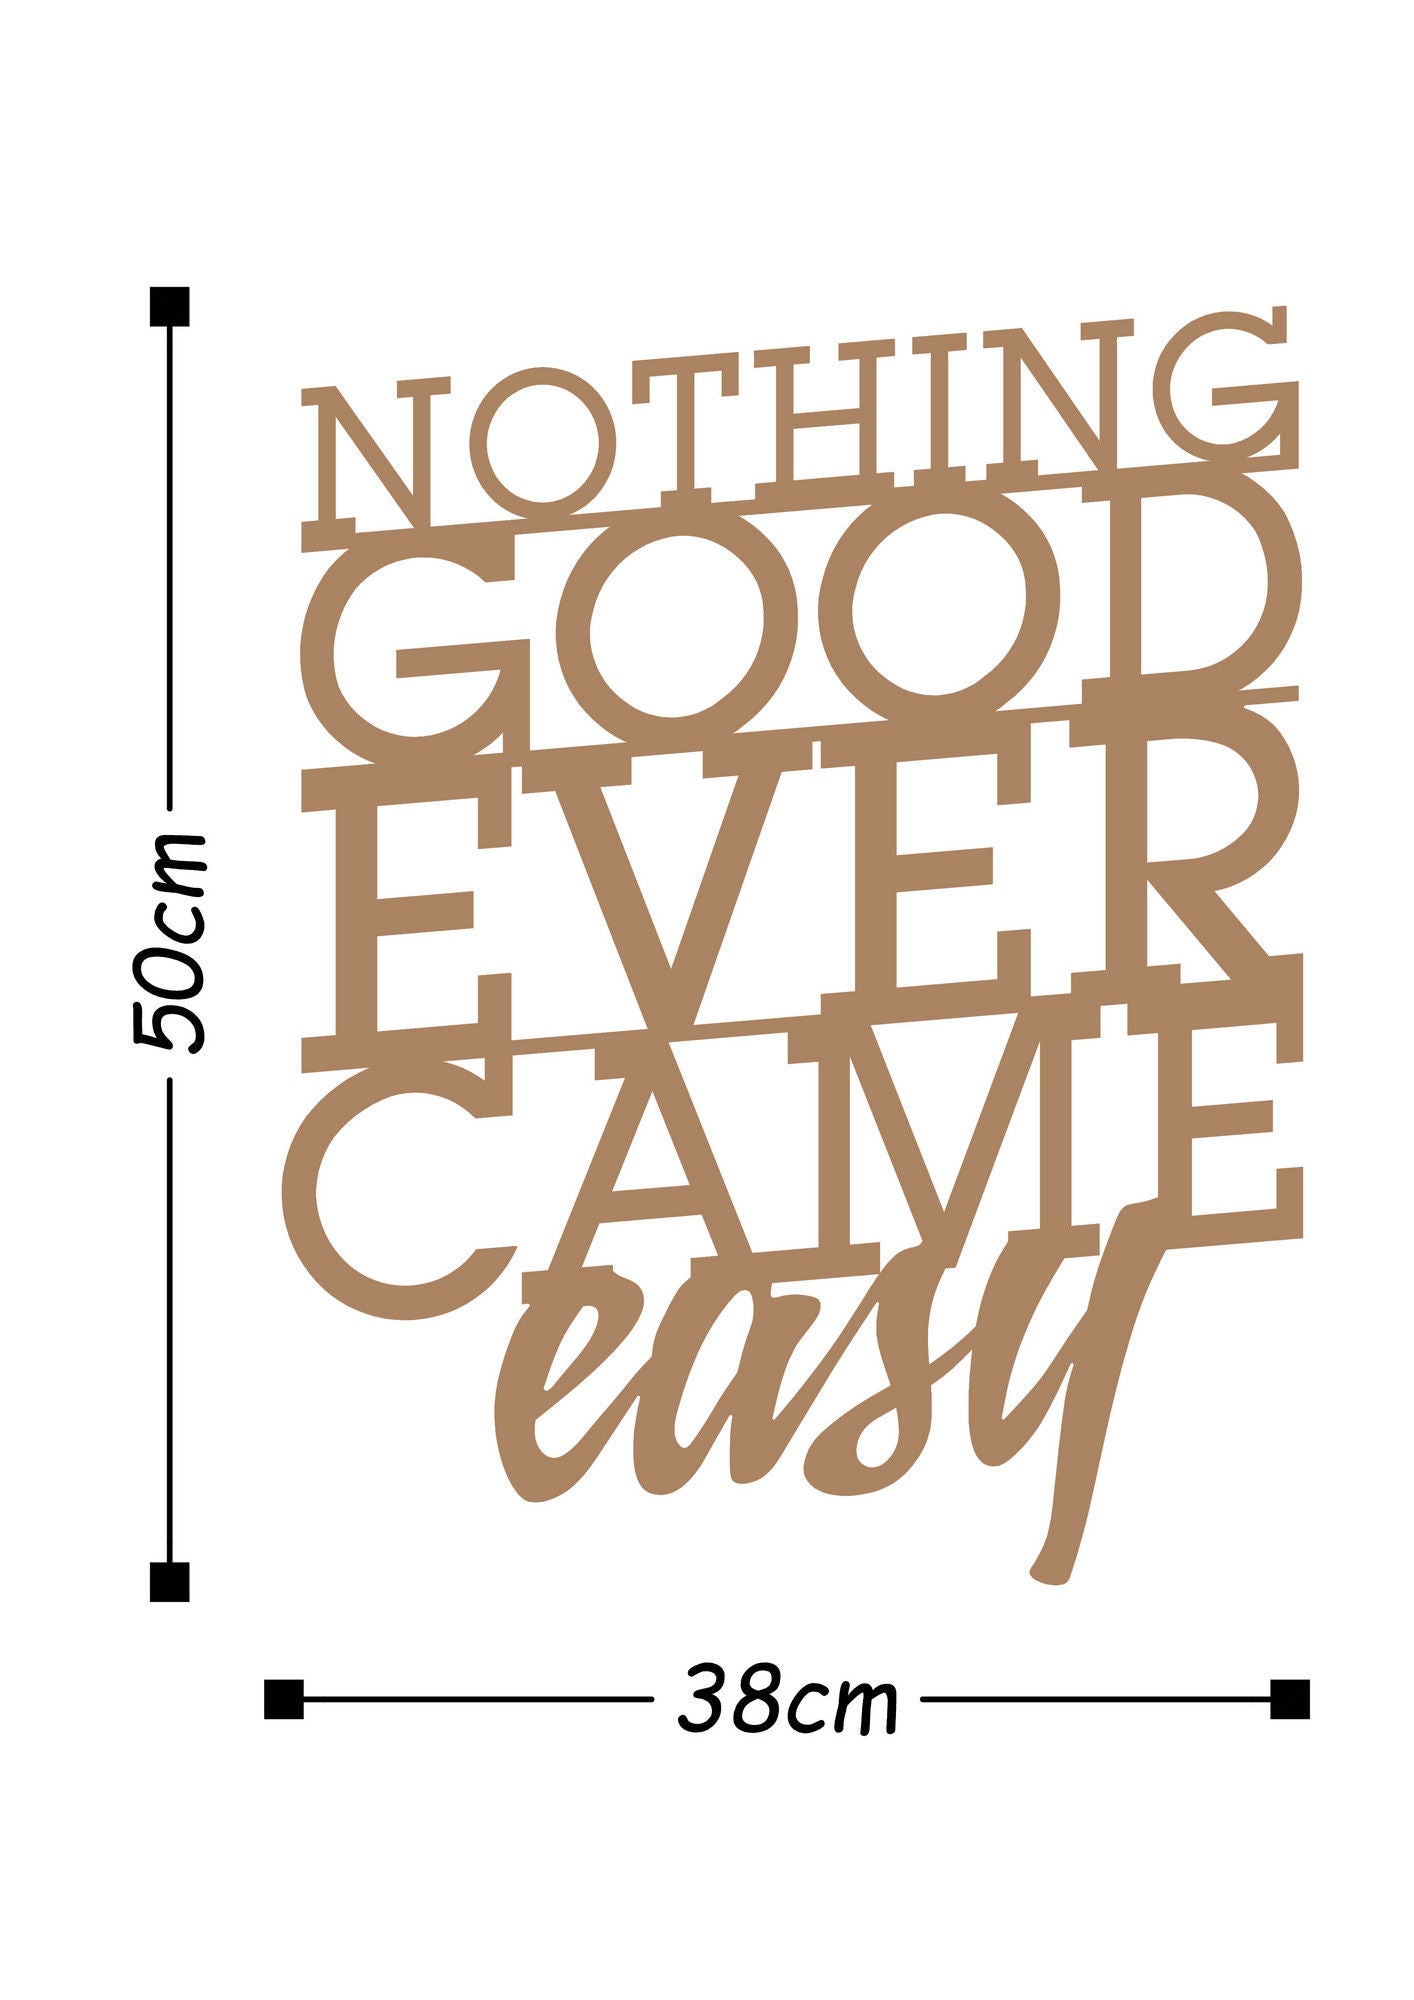 Nothıng Good Ever Came Easy - Copper - Decorative Metal Wall Accessory